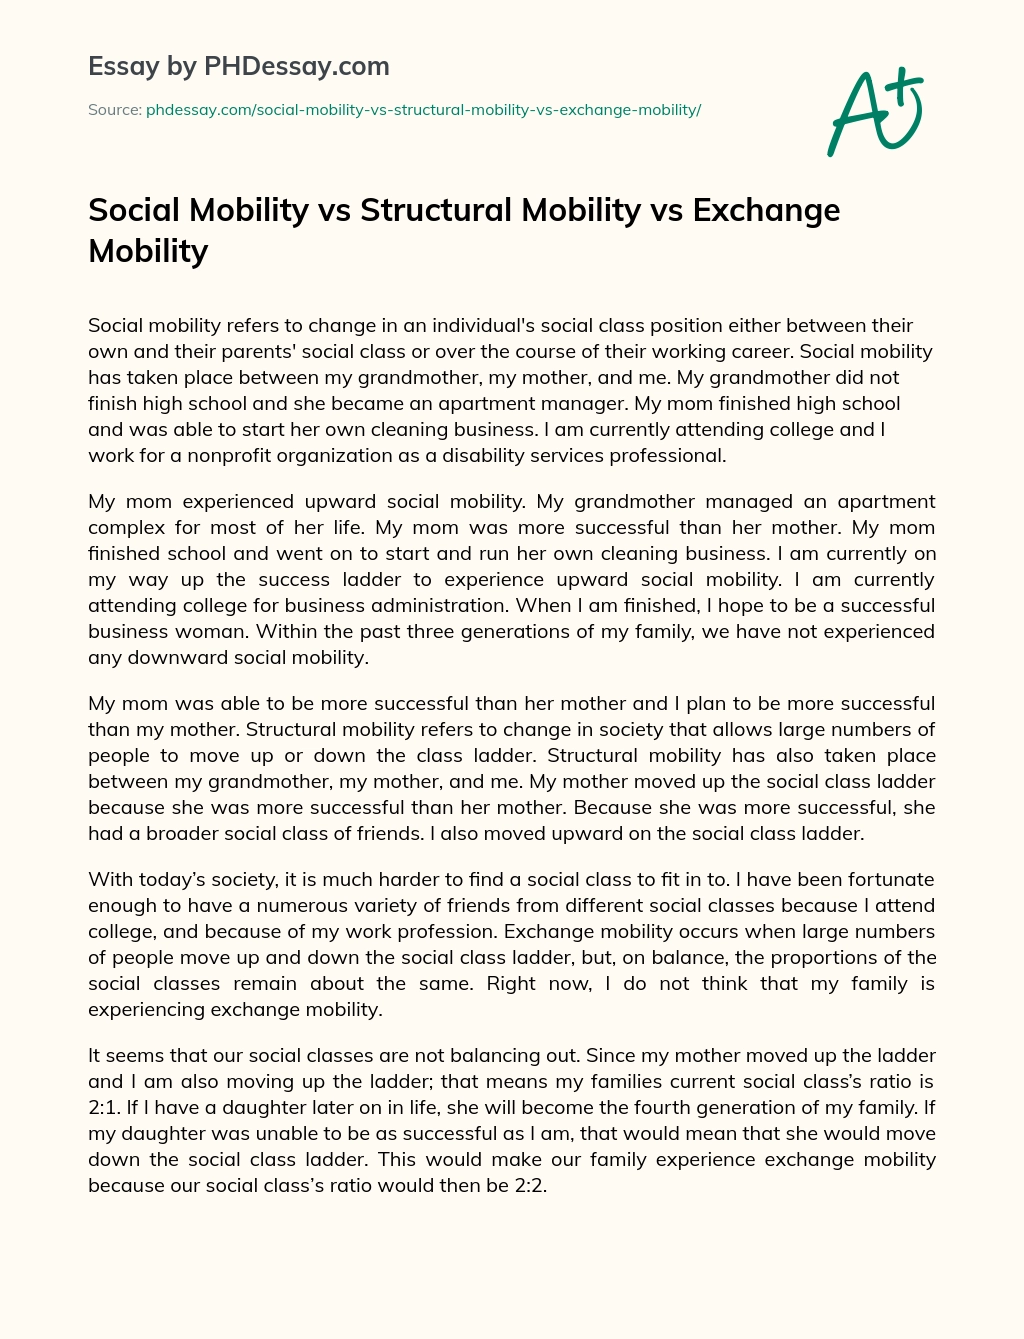 what is structural mobility